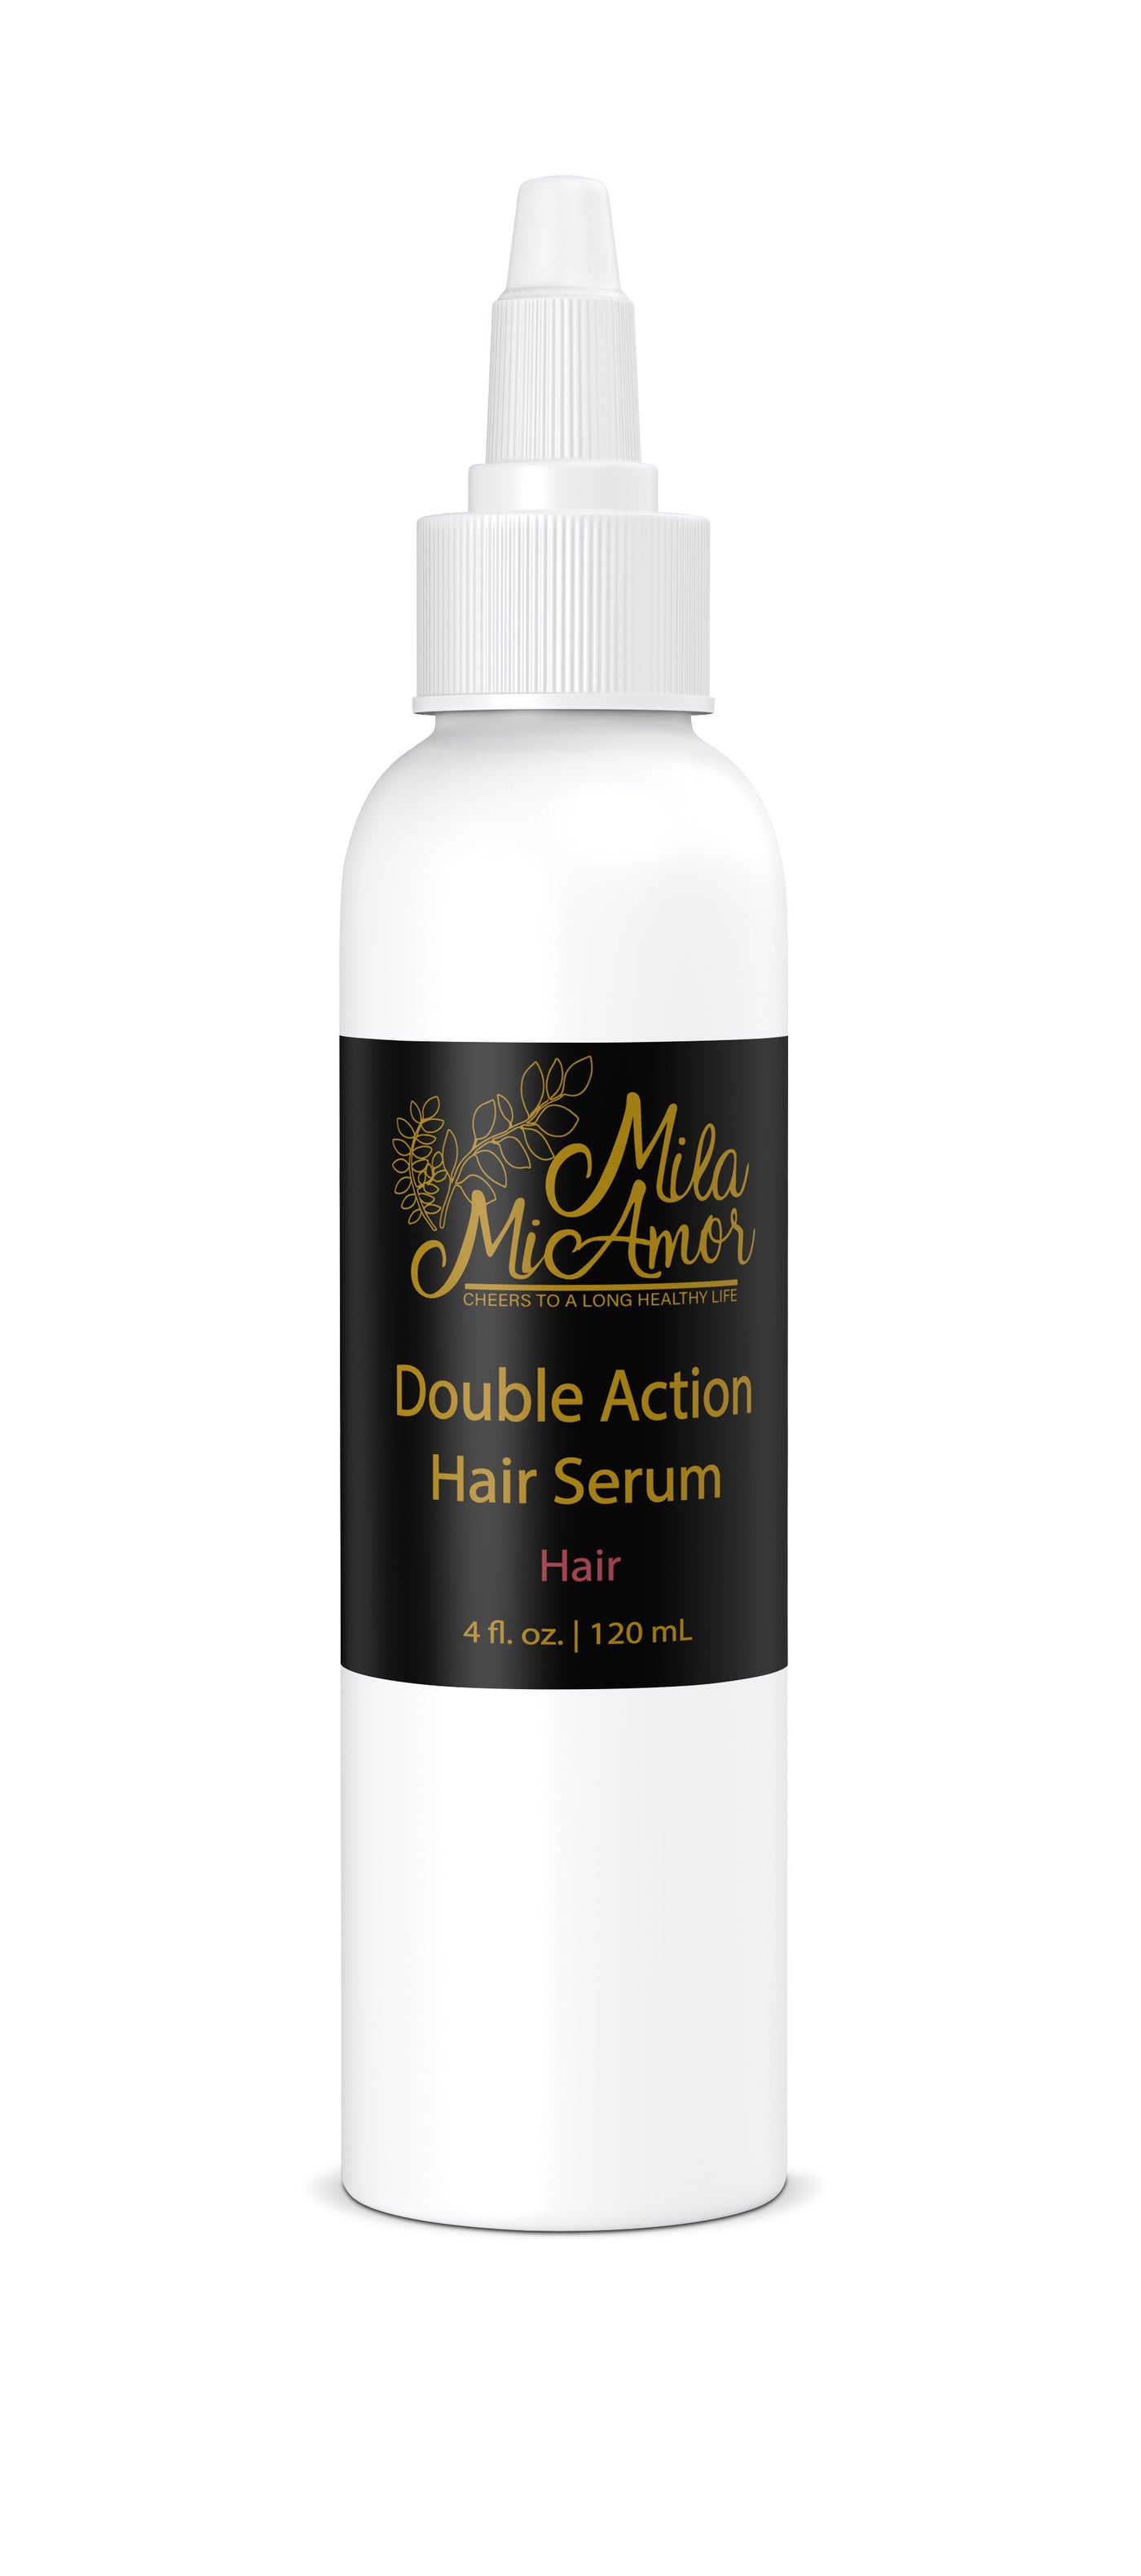 Double Action Hair Serum